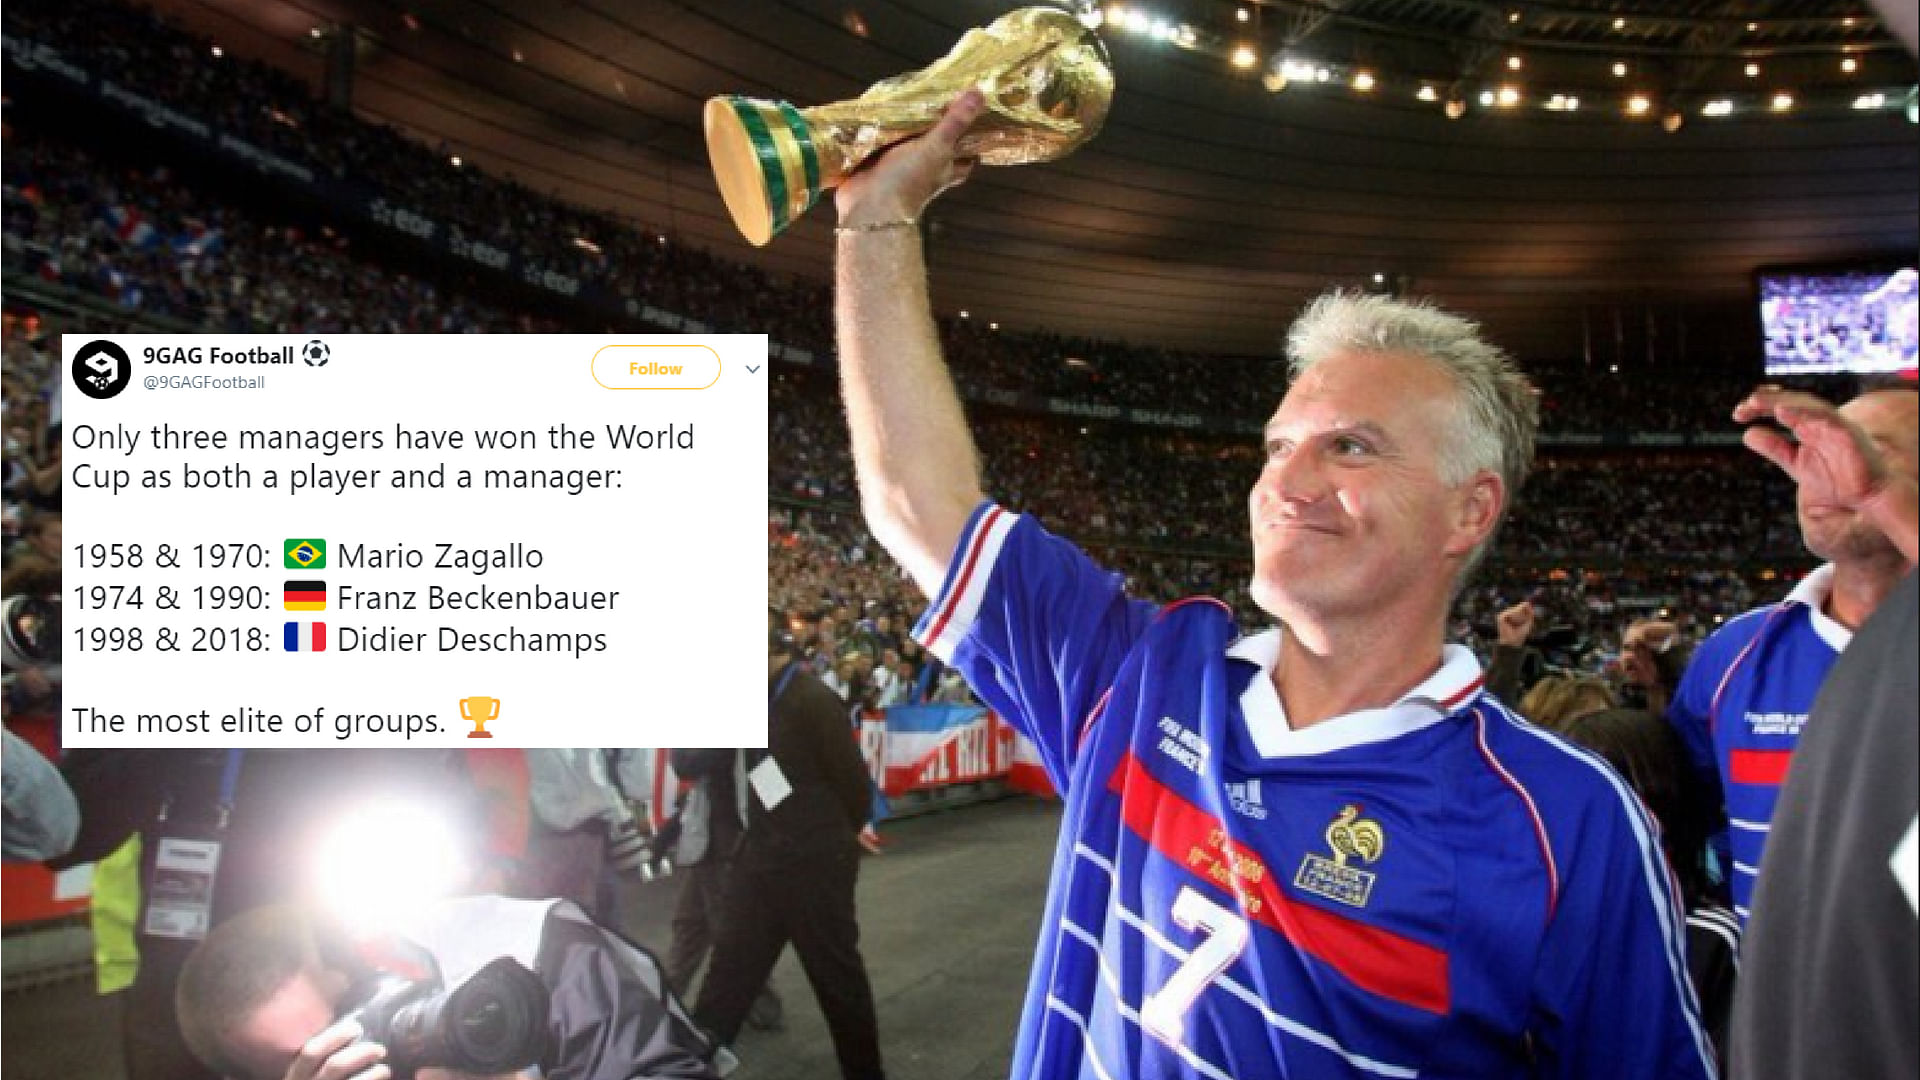 The 49-year-old Didier Deschamps joined Mario Zagallo and Franz Beckenbauer as the only men to play for and coach a world champion.